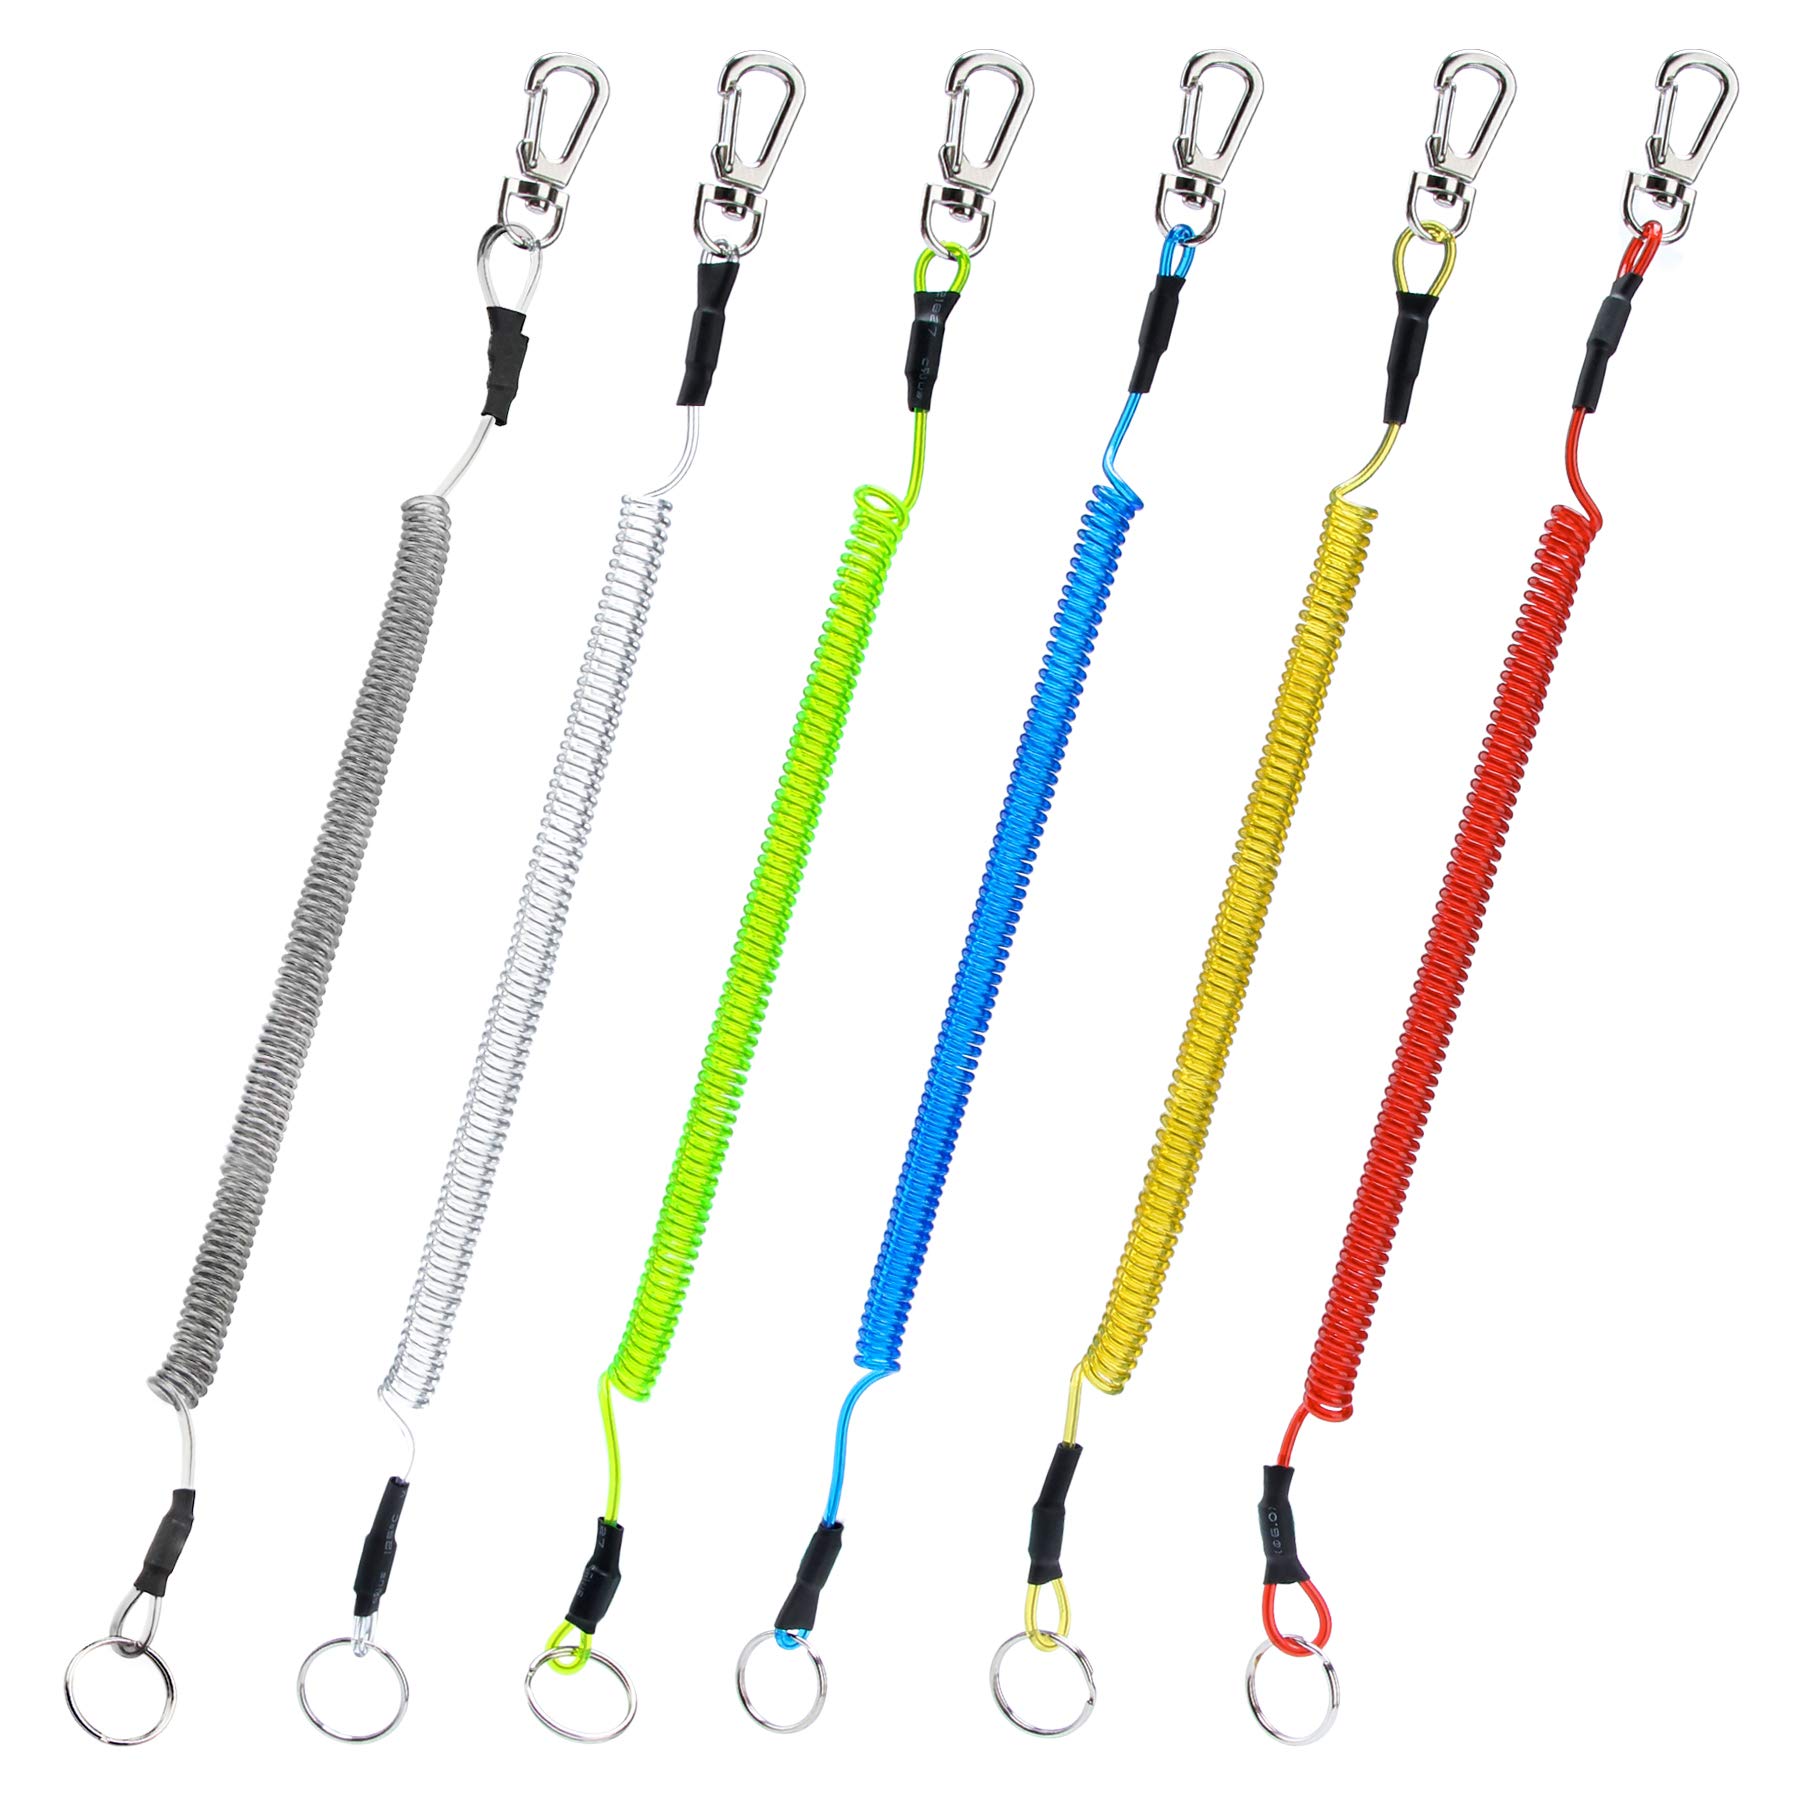 Booms Fishing T04 Fishing Lanyards Fishing Tool/Pole Safety Coil Lanyard  Retractable Wire Inside Tup Cover